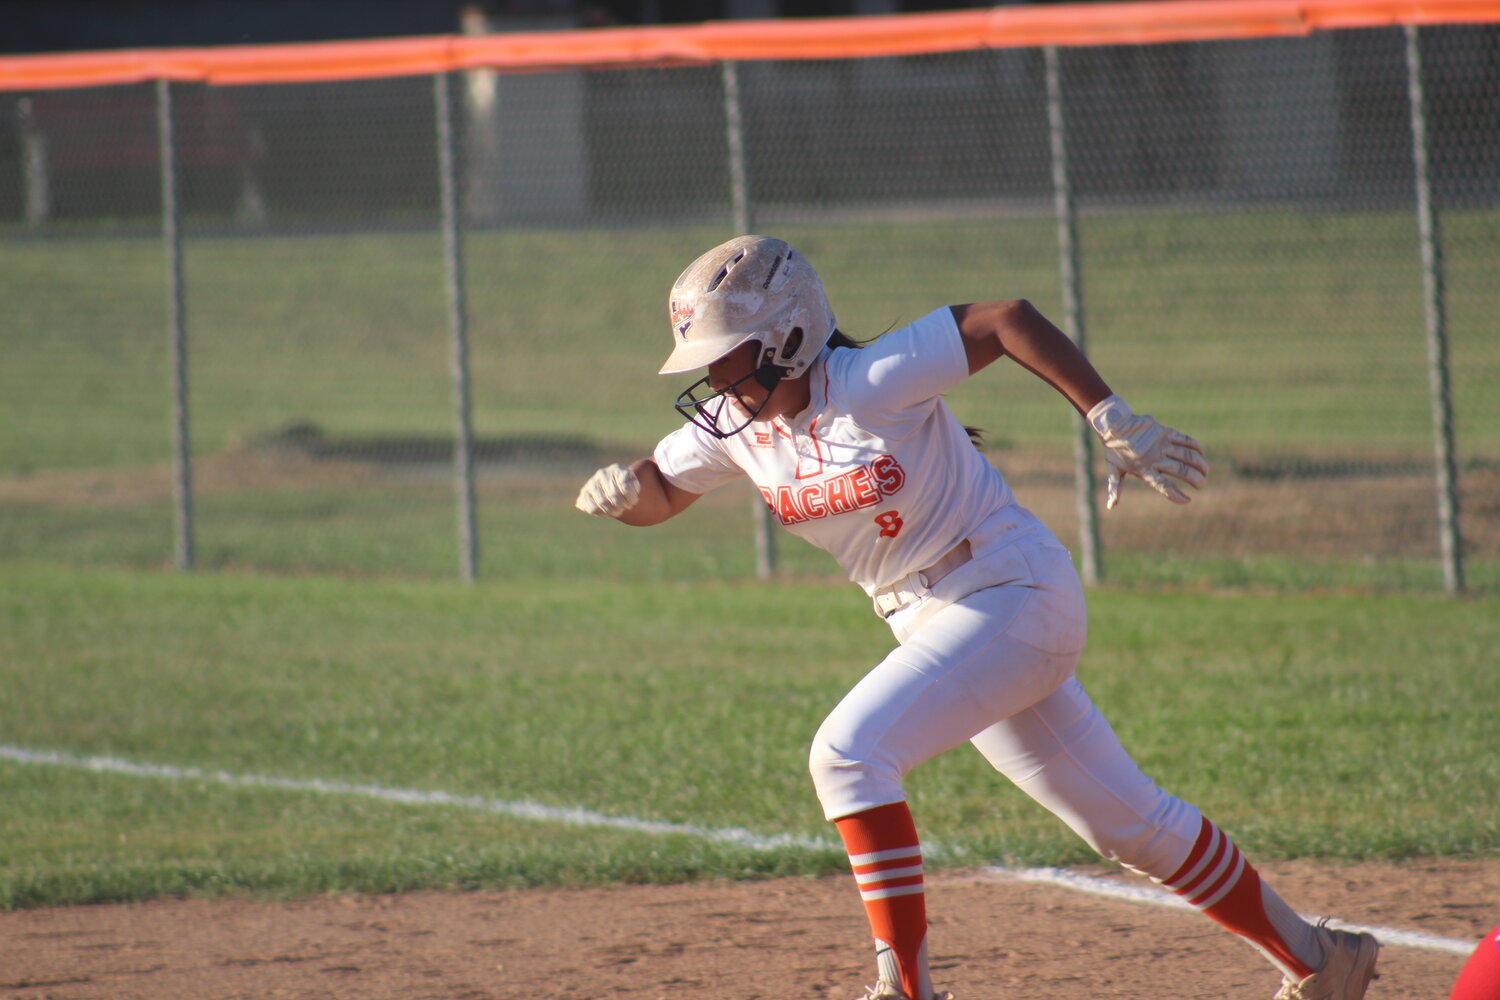 Lady Apaches freshman first basemen Alexzis Hernandez (8) runs towards second base for a steal in the district match against Memorial.